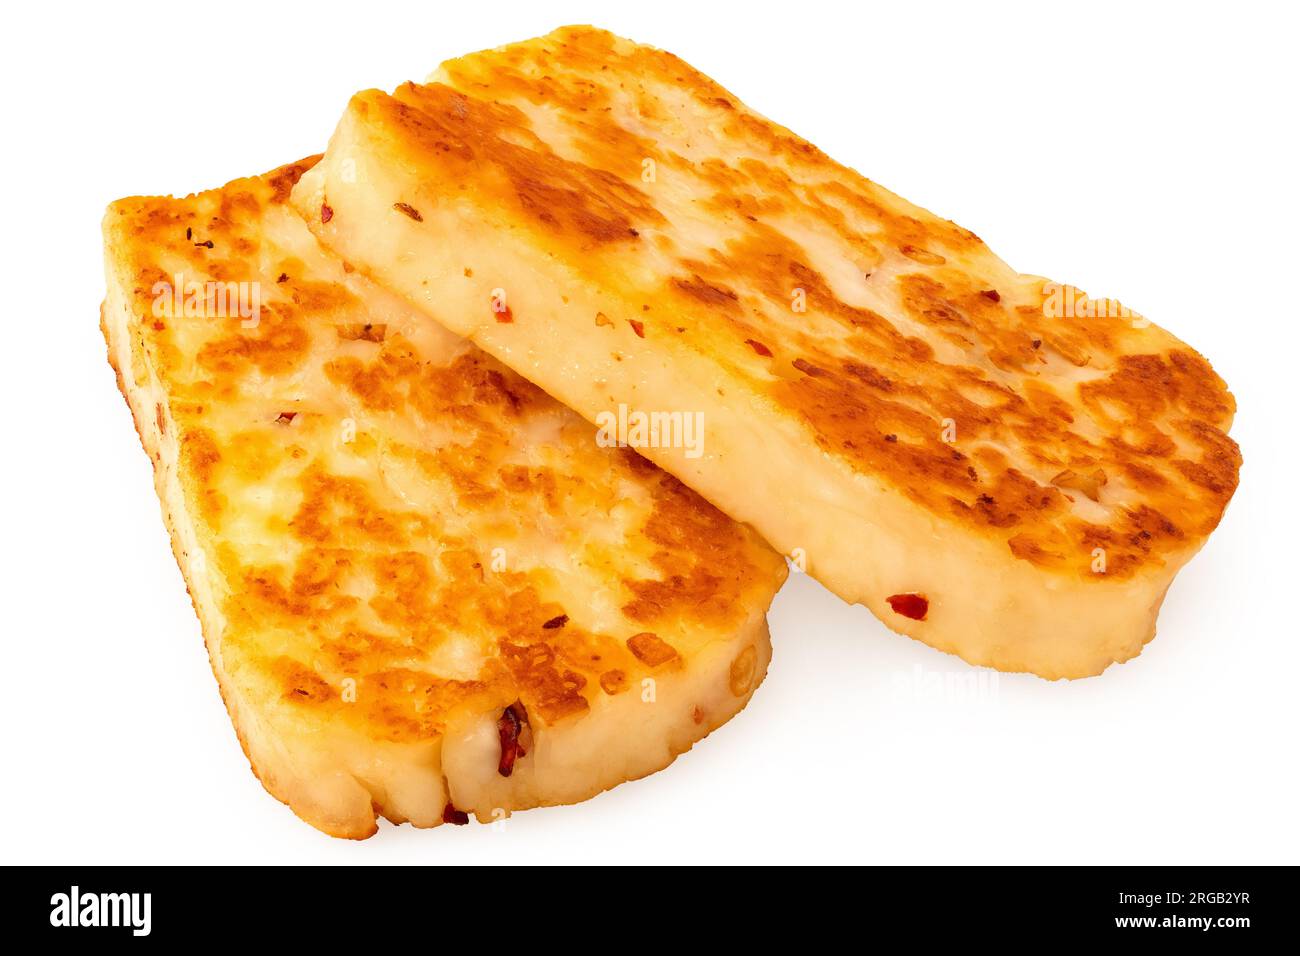 Two fried slices of halloumi cheese with red chilli isolated on white. Stock Photo